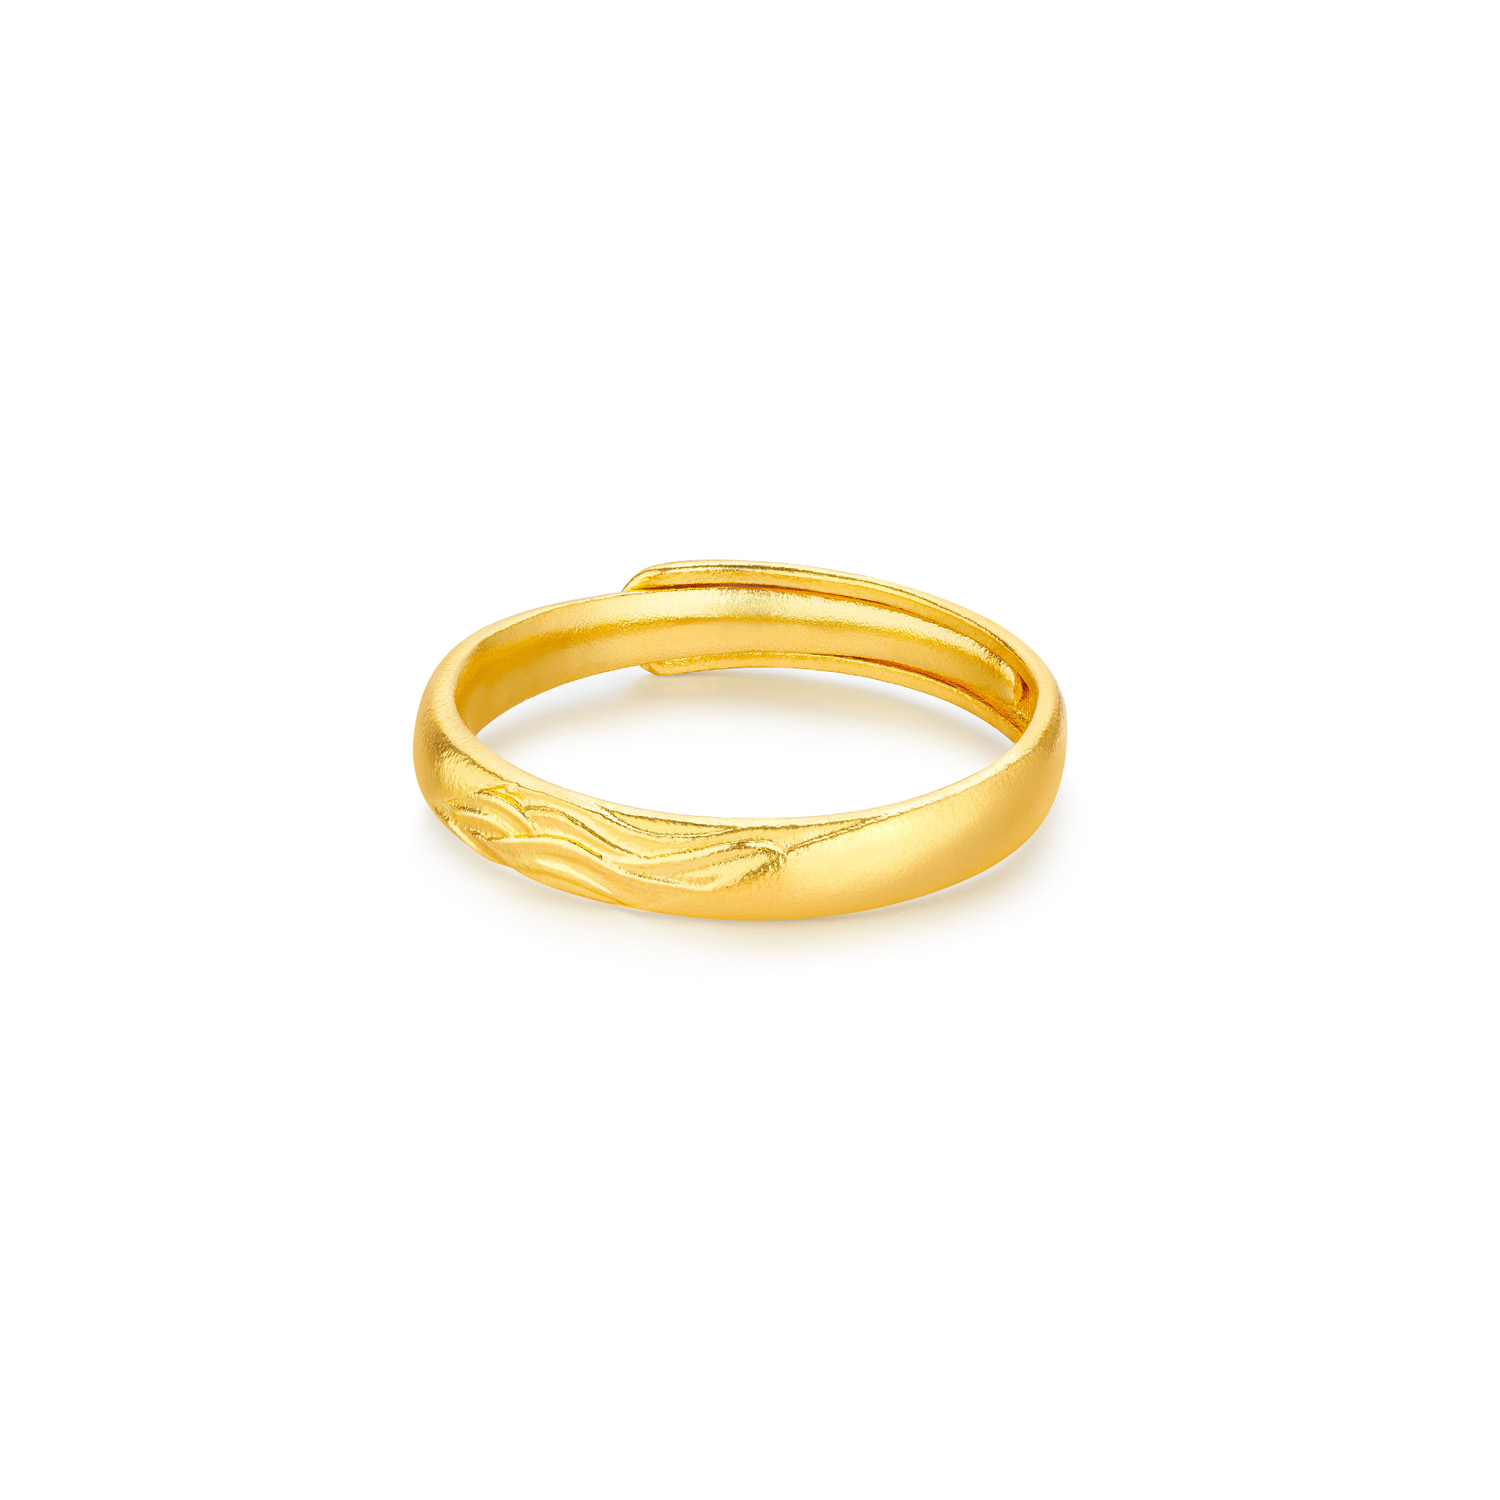 Heirloom Fortune - Charm of Song Dynasty Collection "Landscape" Gold Ring （Female）